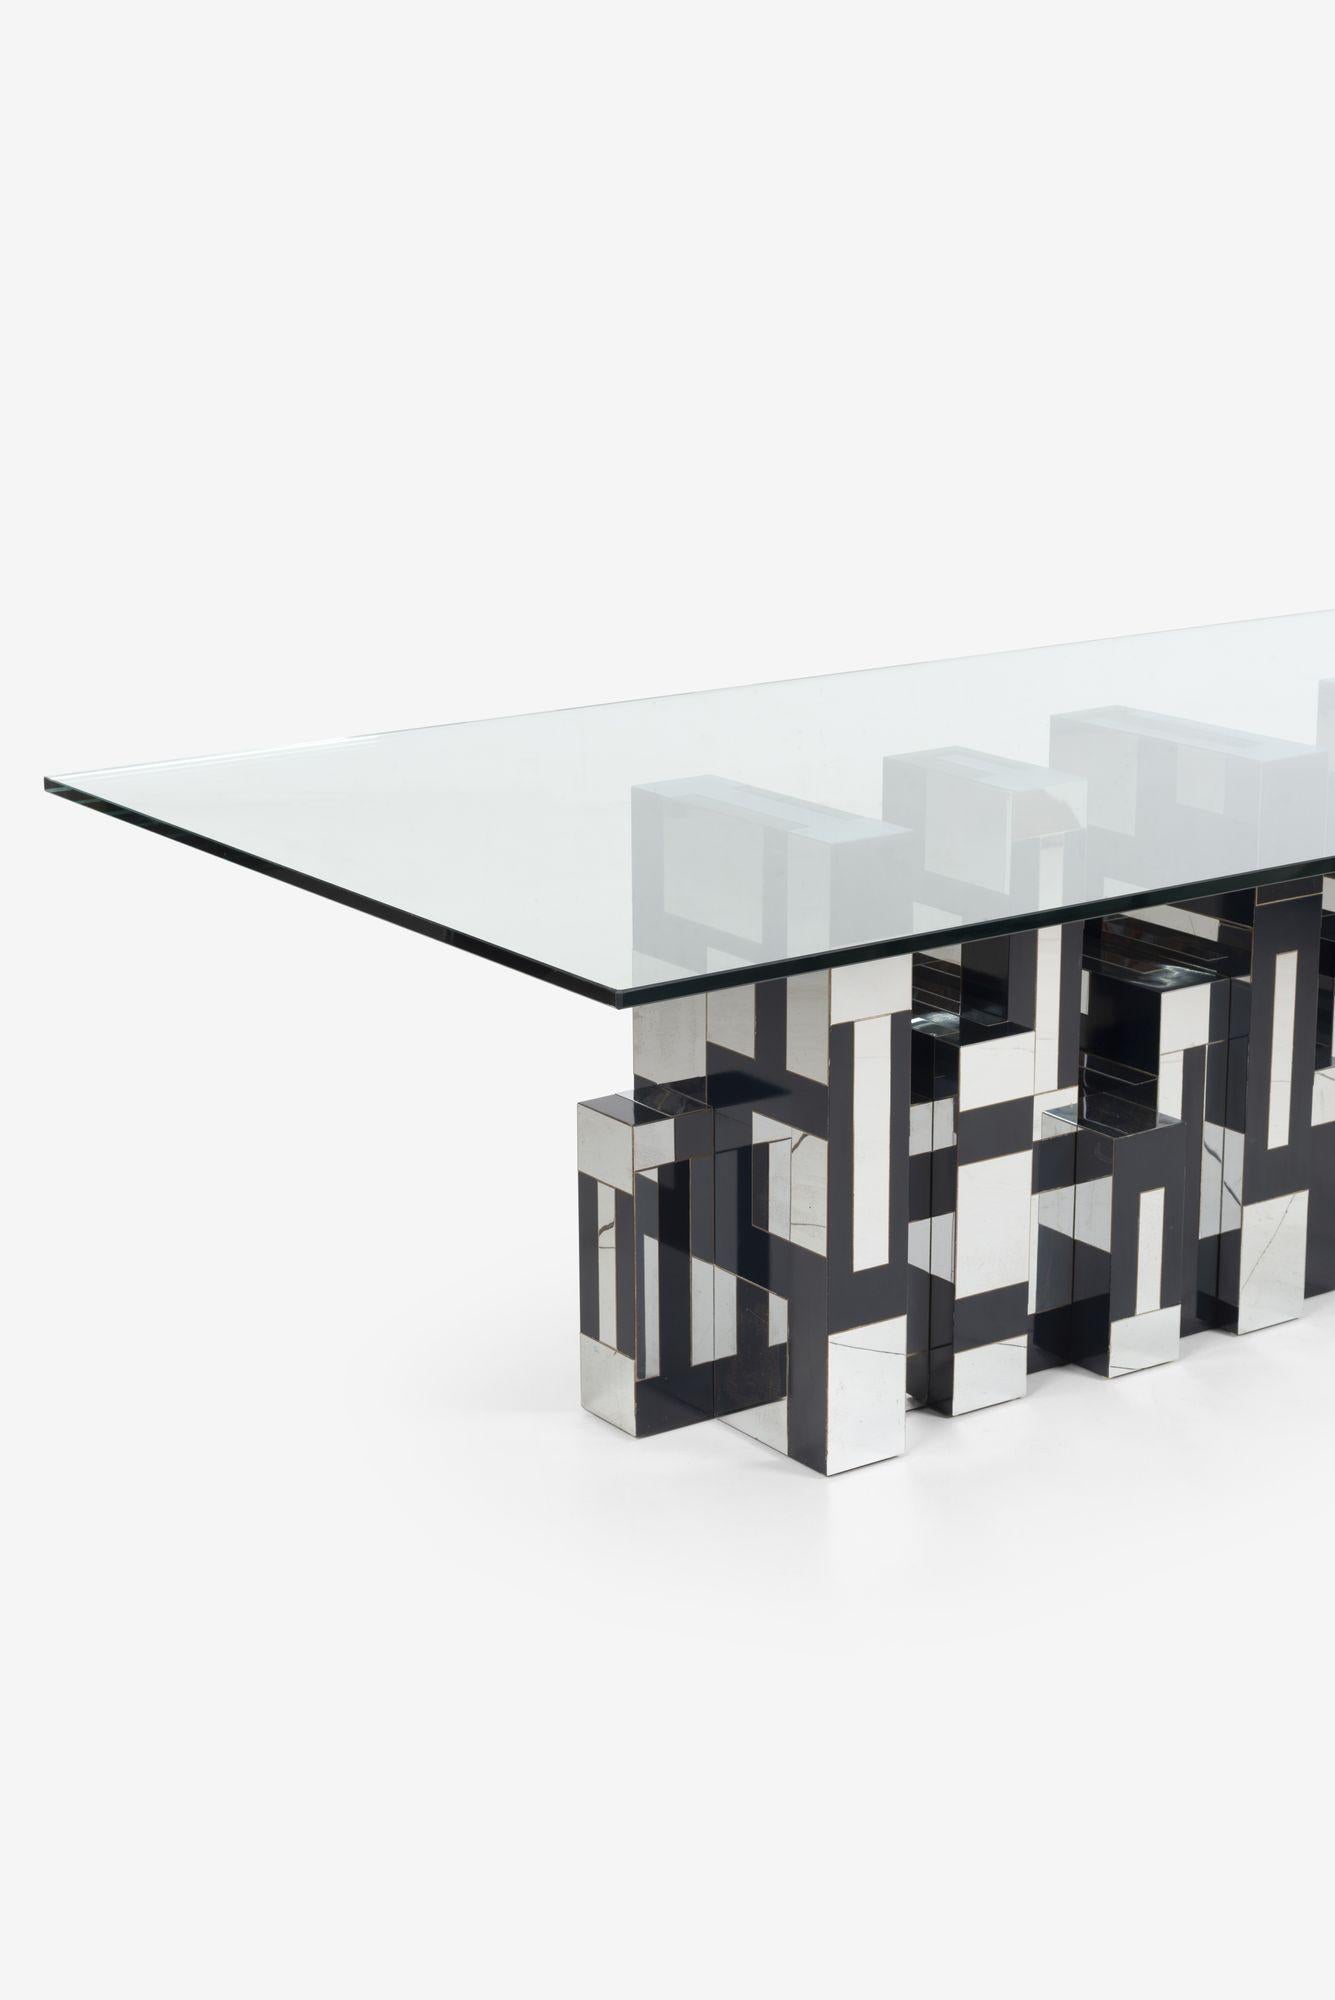 Glass Paul Evans Studio for Directional Cityscape Dining Table, 1975